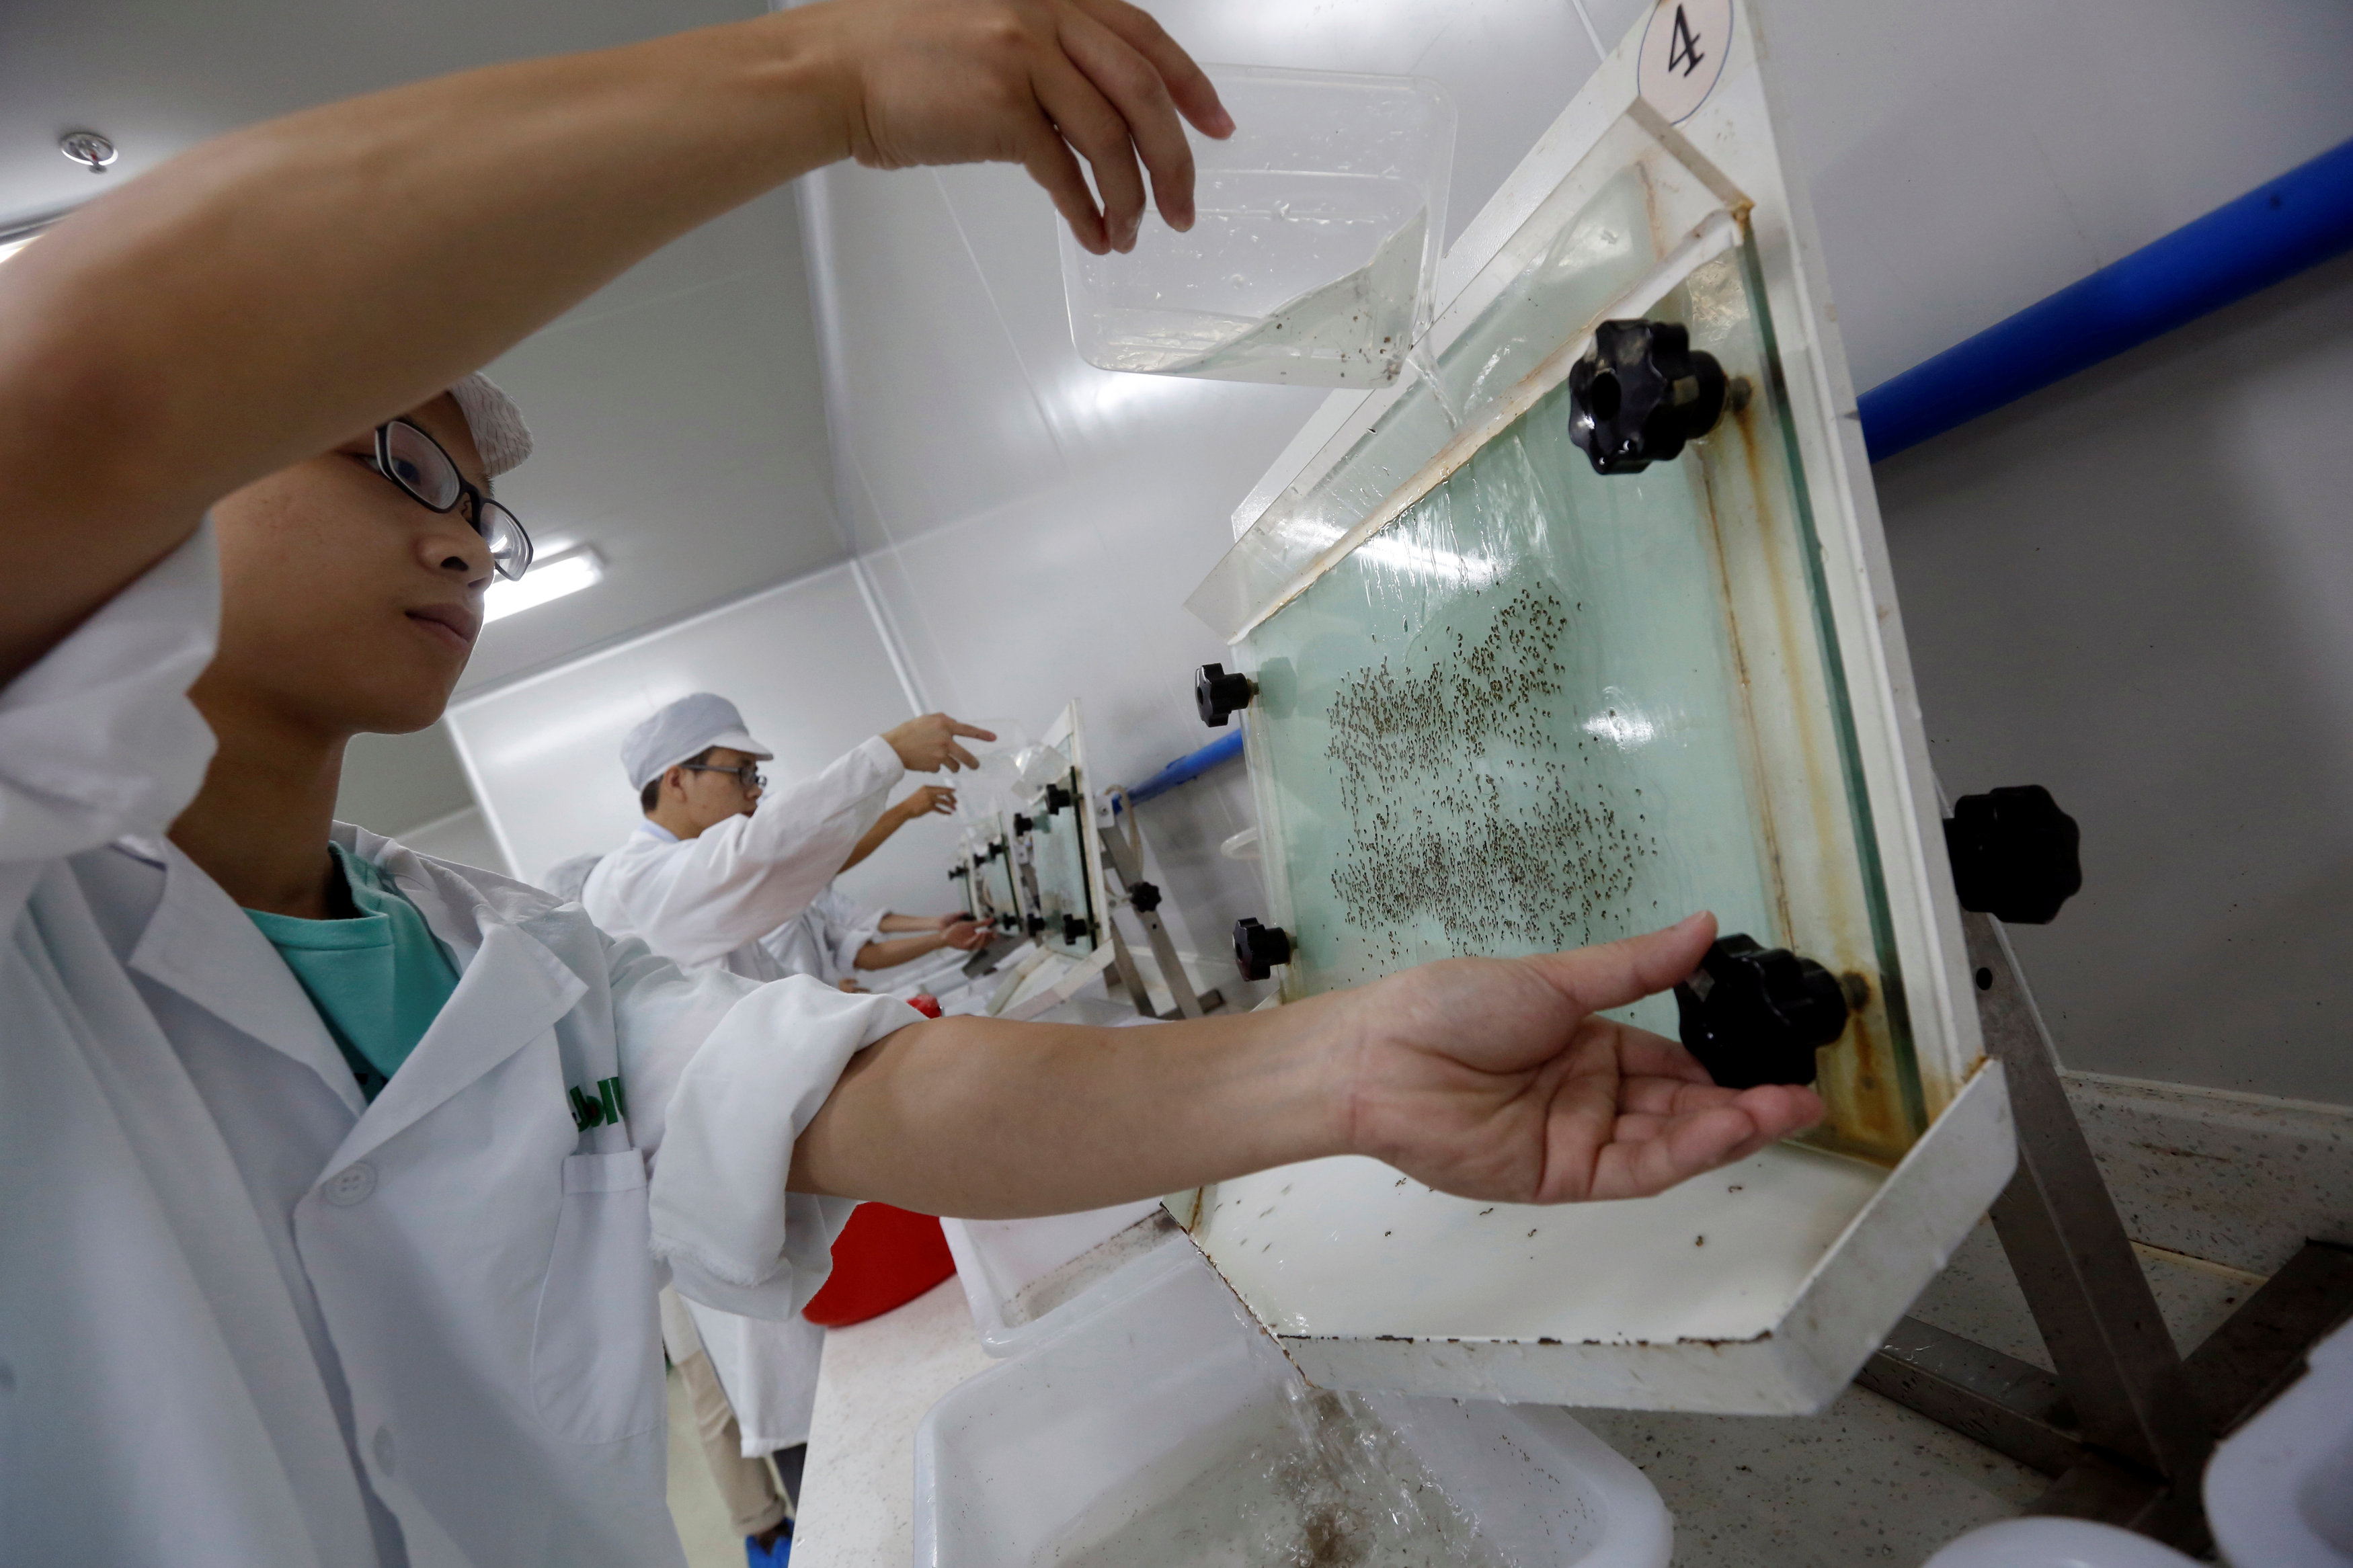 Lab technicians work at a "sex separation area" inside Sun Yat-Sen University-Michigan State University Joint Center of Vector Control for Tropical Disease, the world’s largest "mosquito factory" which breeds millions of bacteria-infected mosquitoes, in the fight against the spread of viruses such as dengue and Zika, in Guangzhou, China July 28, 2016. Picture taken July 28, 2016. REUTERS/Bobby Yip